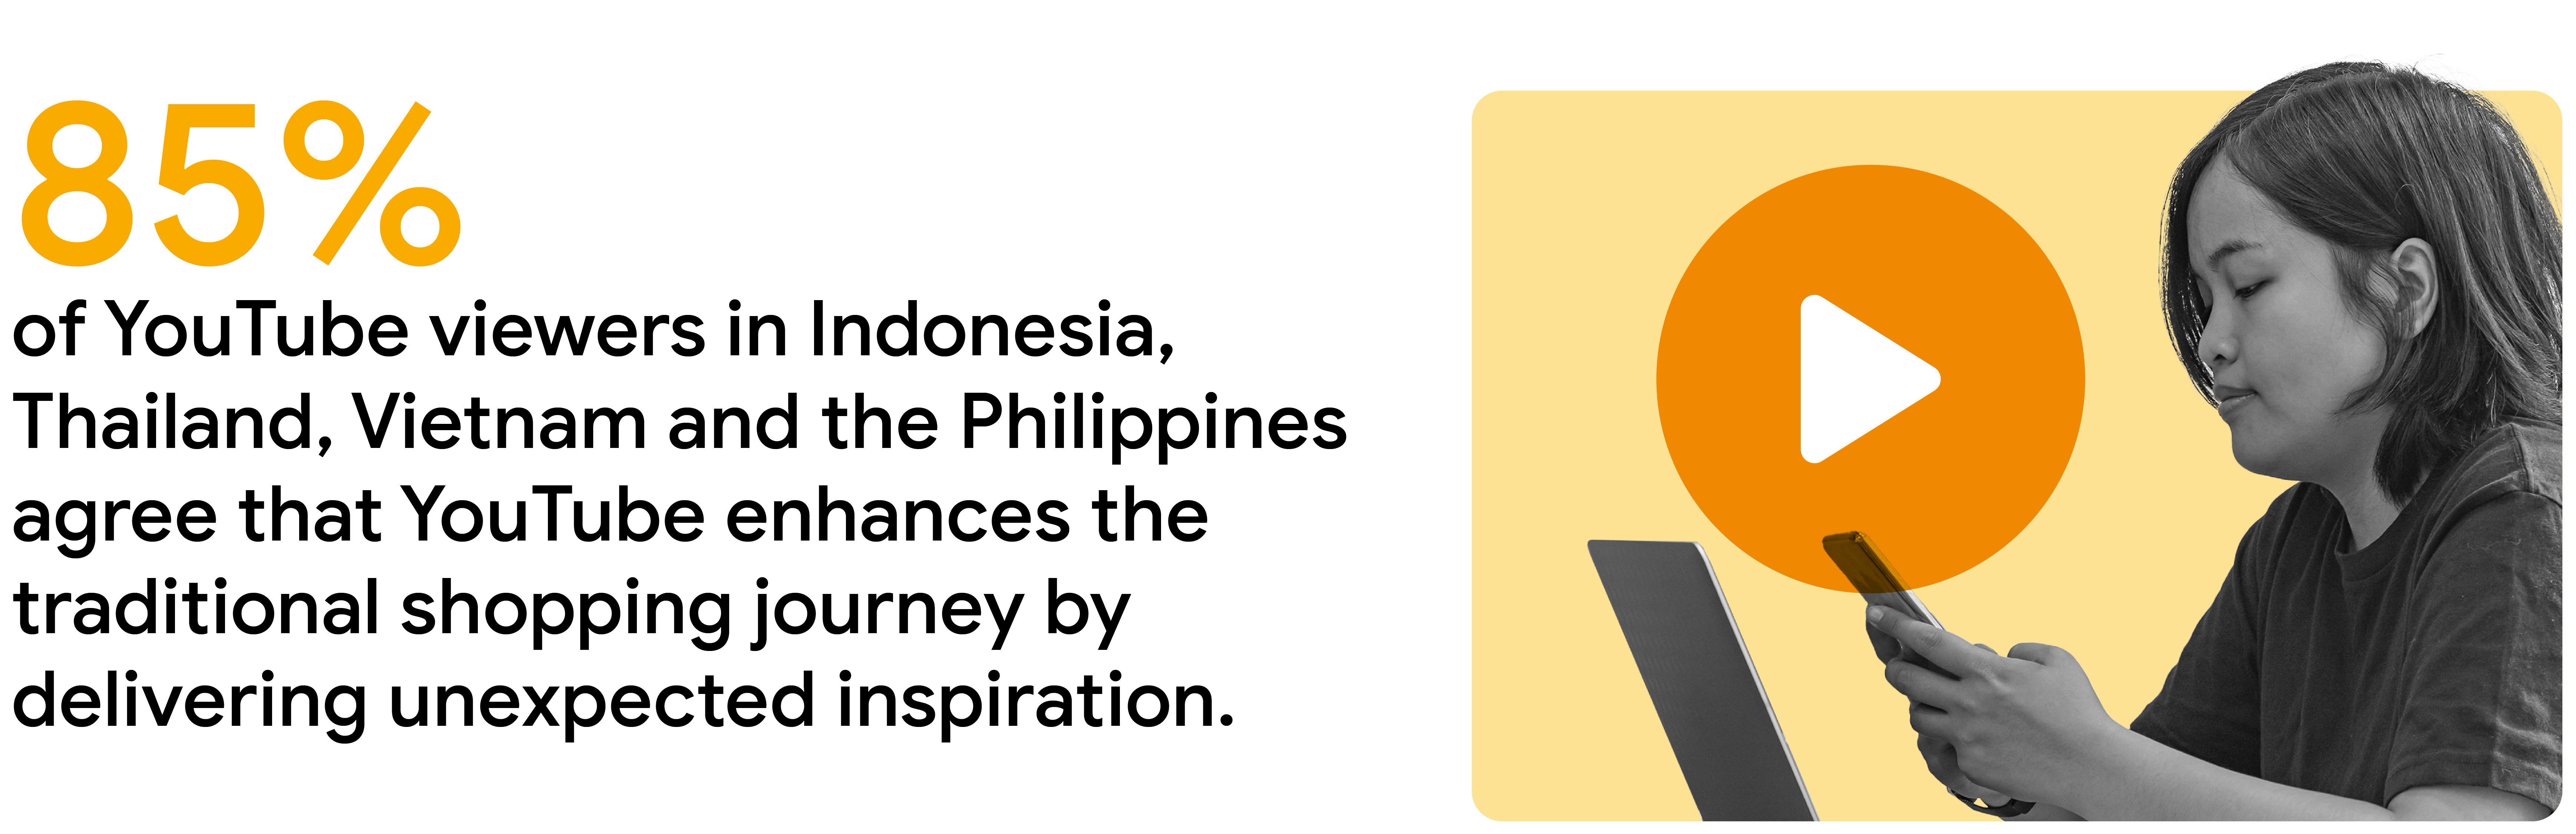 85% of YouTube viewers in Indonesia, Thailand, Vietnam and the Philippines agree that YouTube enhances the traditional shopping journey by delivering unexpected inspiration.